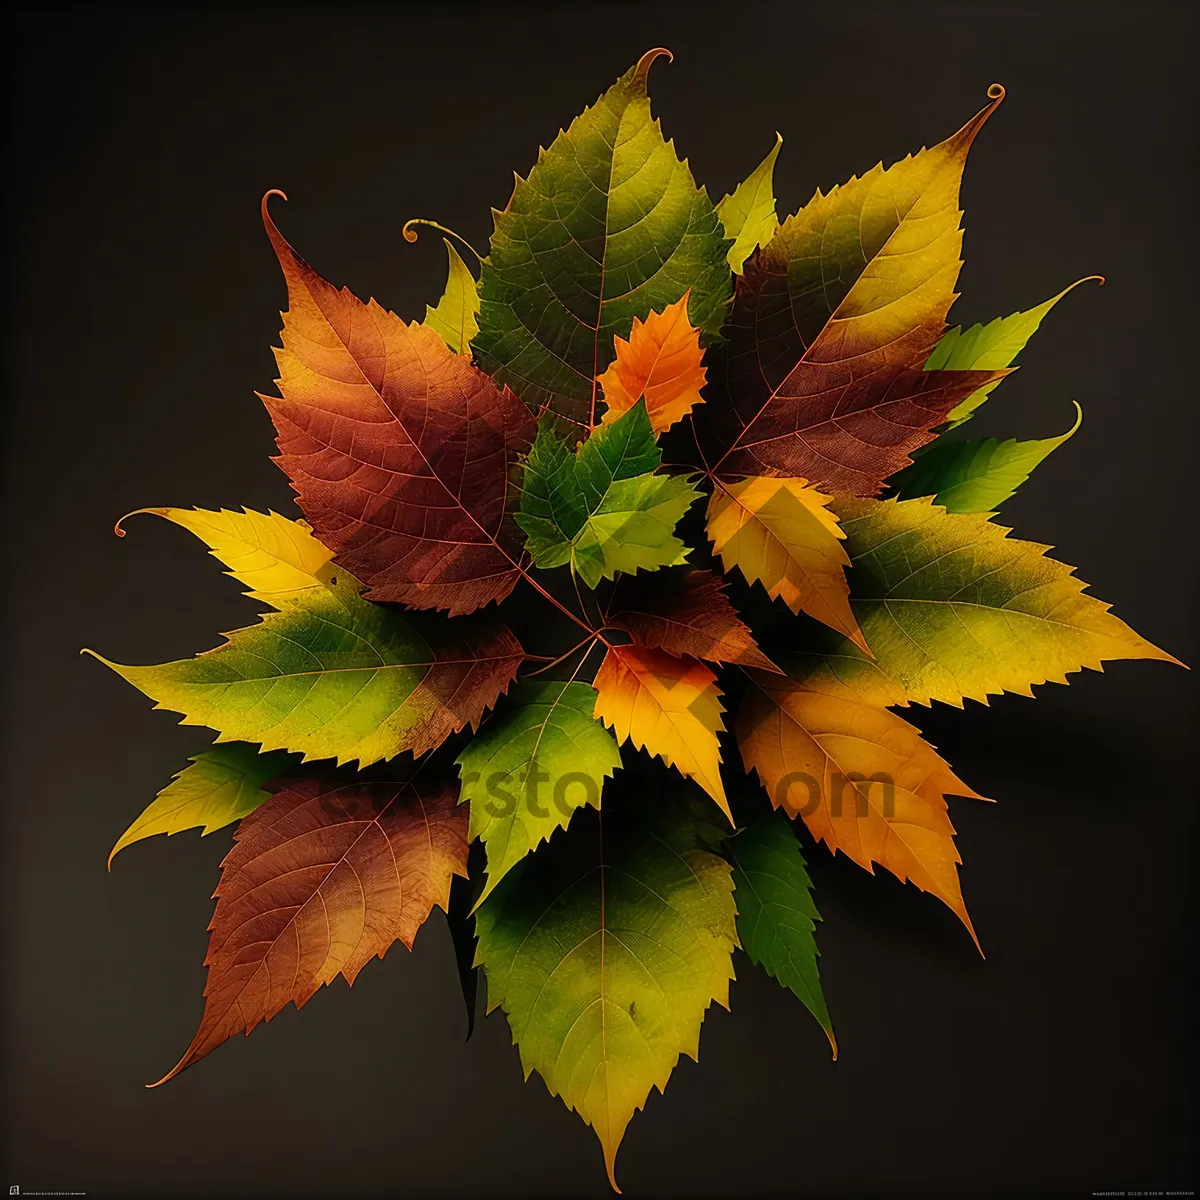 Picture of Bright Autumn Maple Leaf in Colorful Foliage